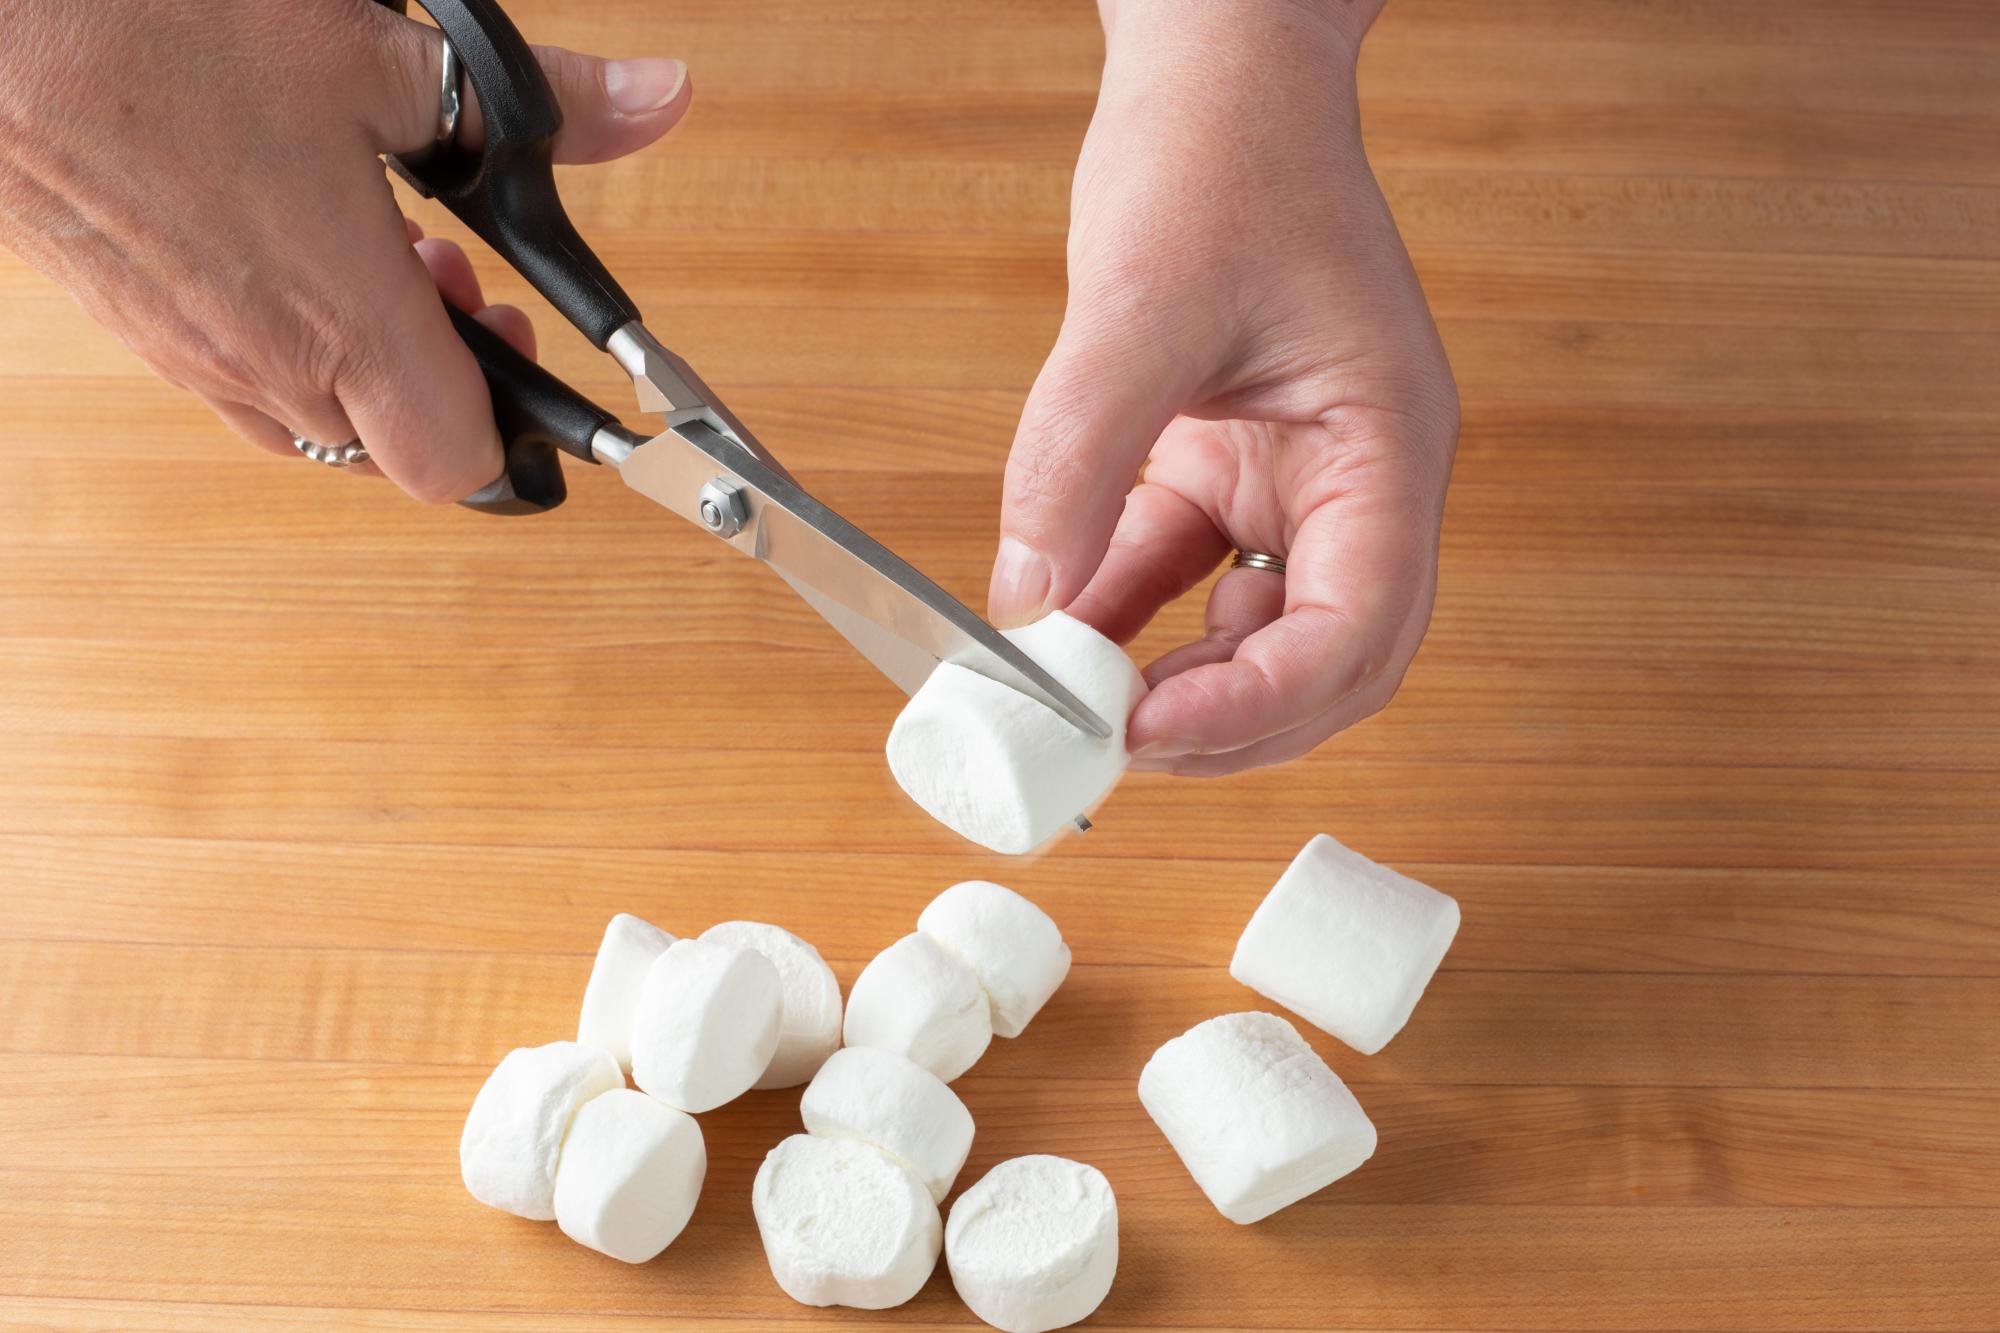 Cutting the marshmallows with Super Shears.